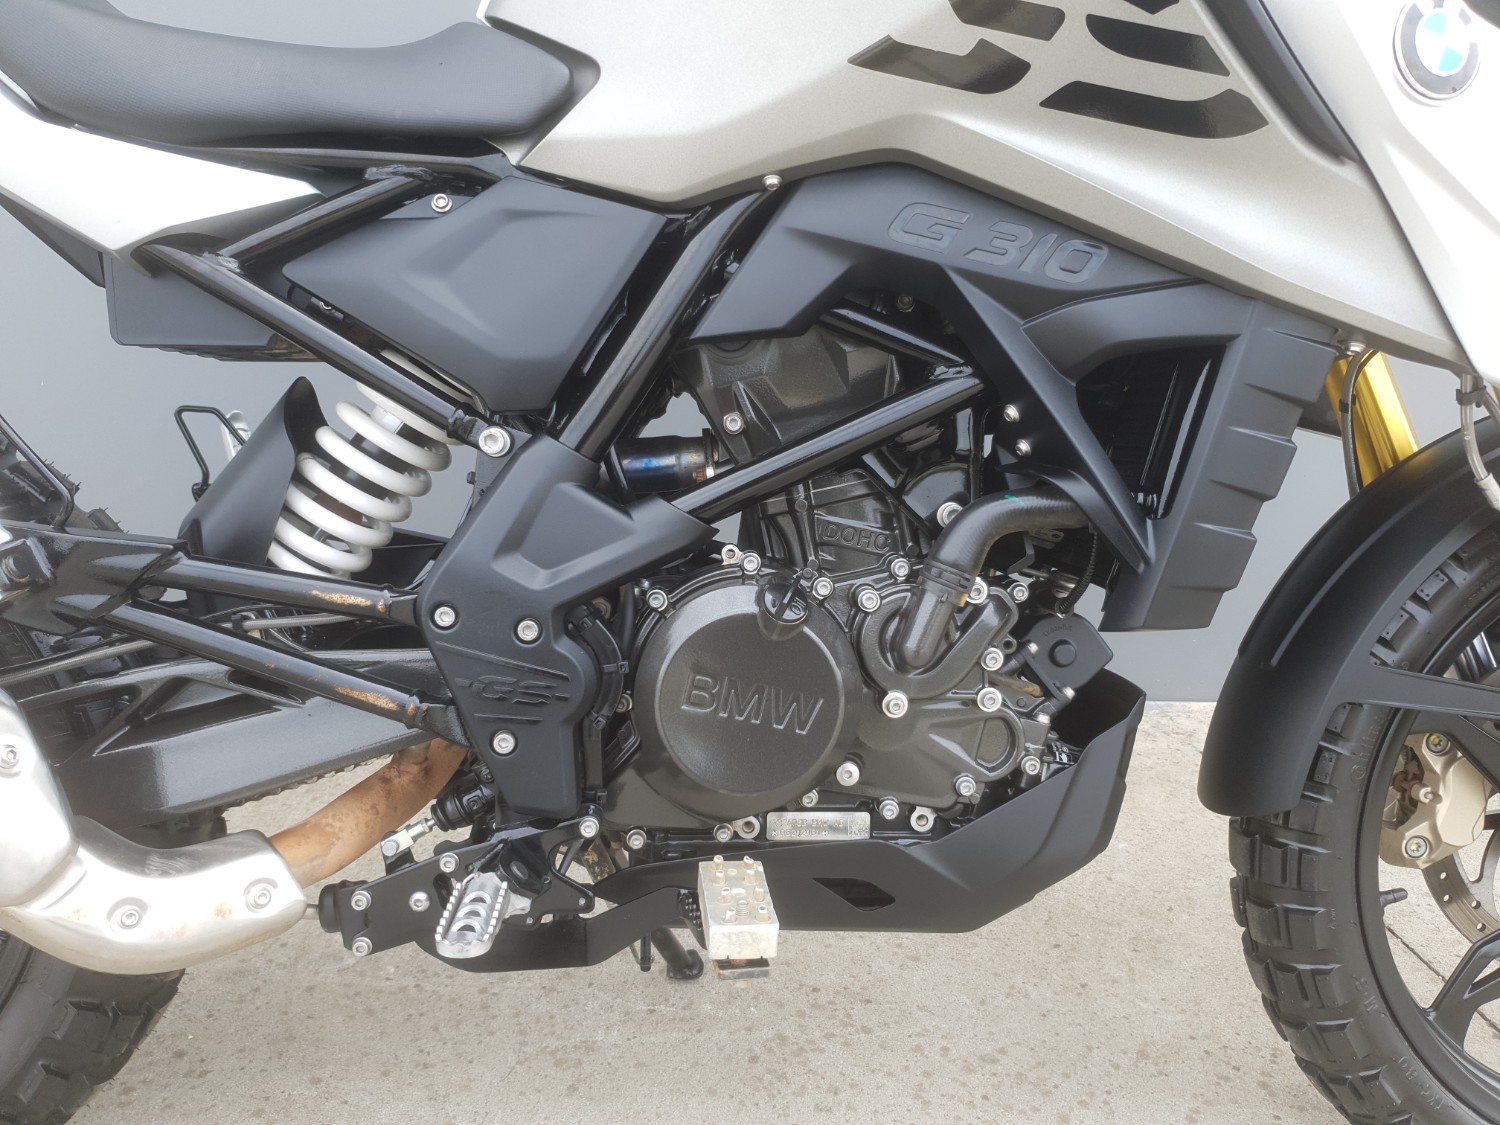 2021 BMW G 310 GS Motorcycle Image 18